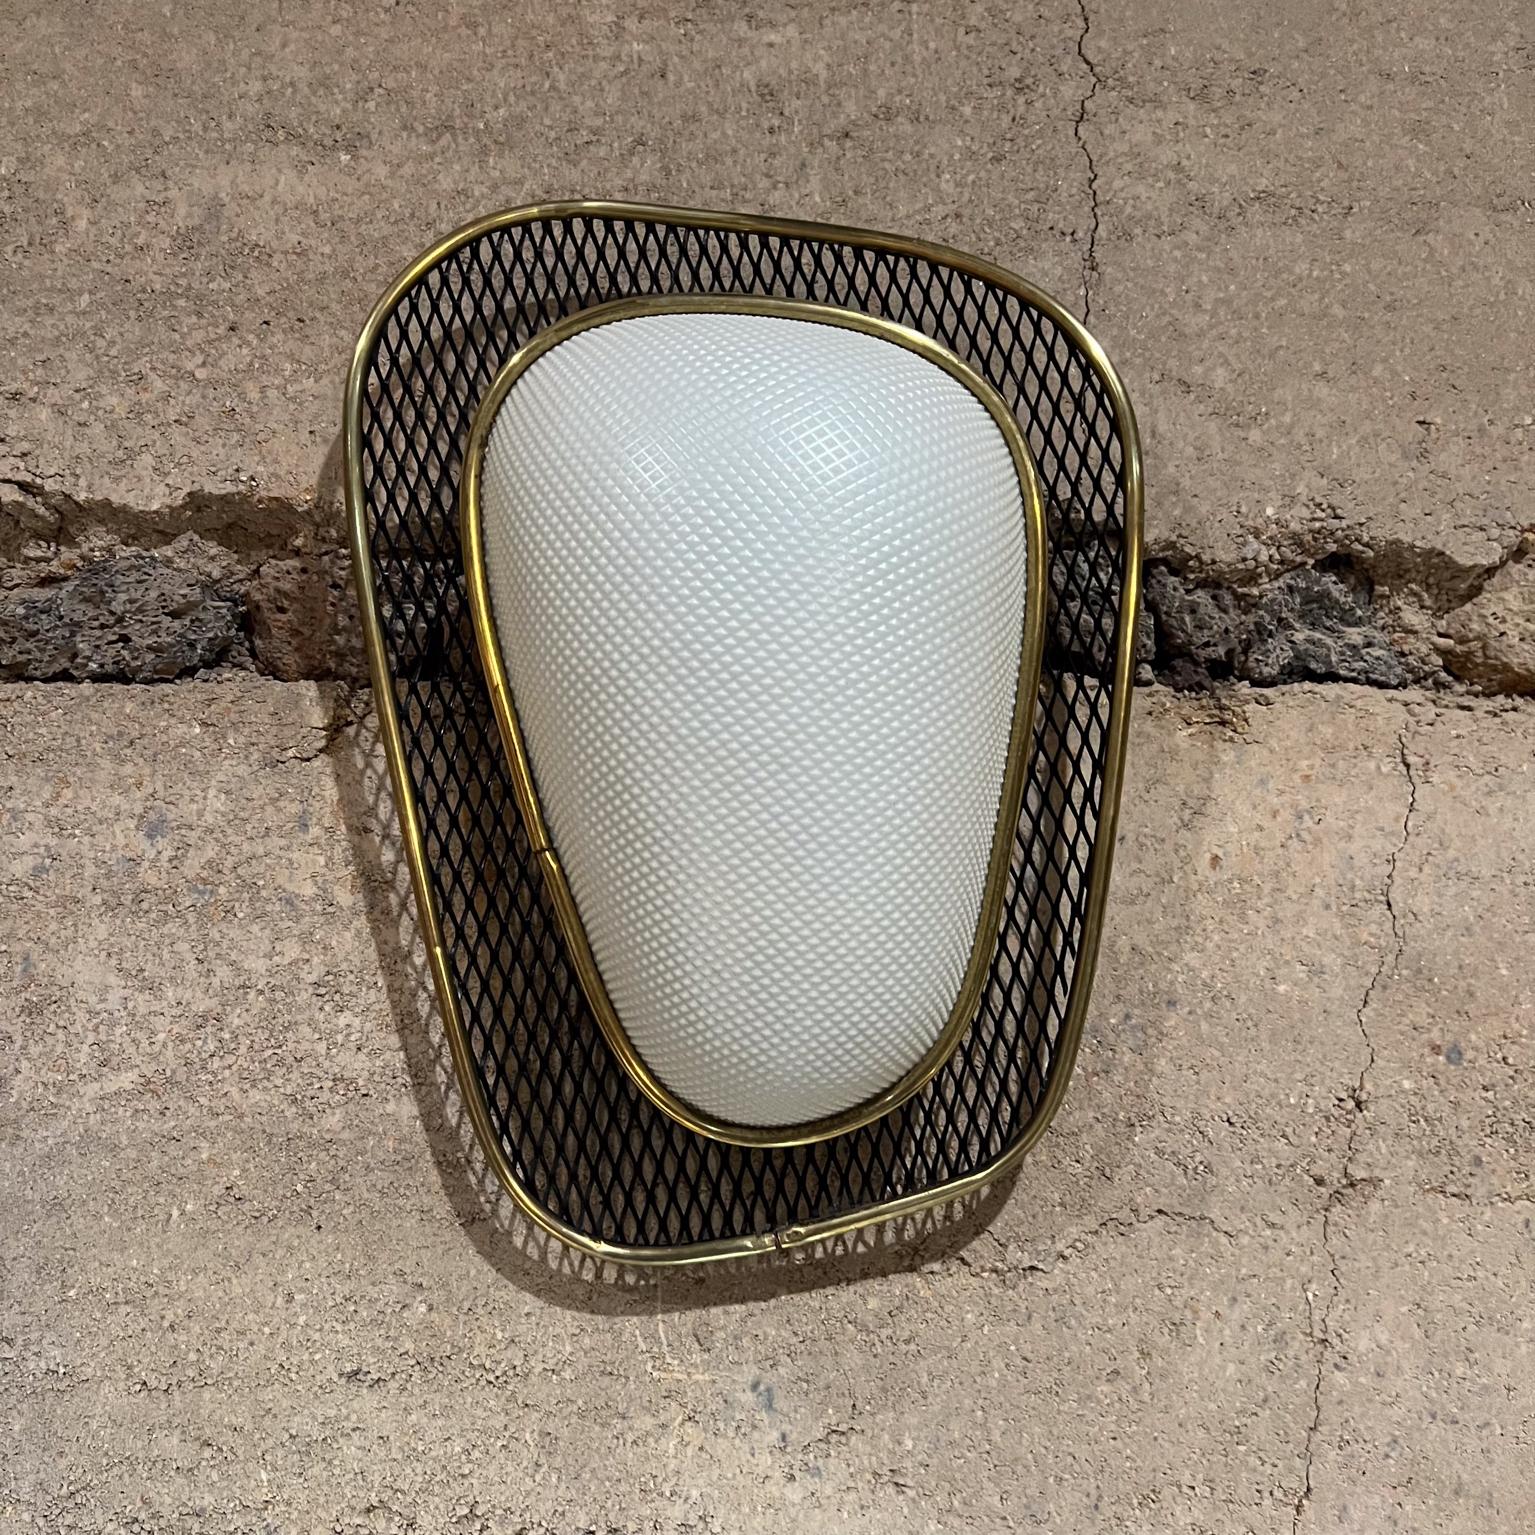 AMBIANIC presents
European Wall Sconce after Mathieu Matégot
unmarked
Brass Metal Steel Paint Plexiglass
12.5 H x 9 W x 4.775
Preowned vintage unrestored condition, please see images provided.

